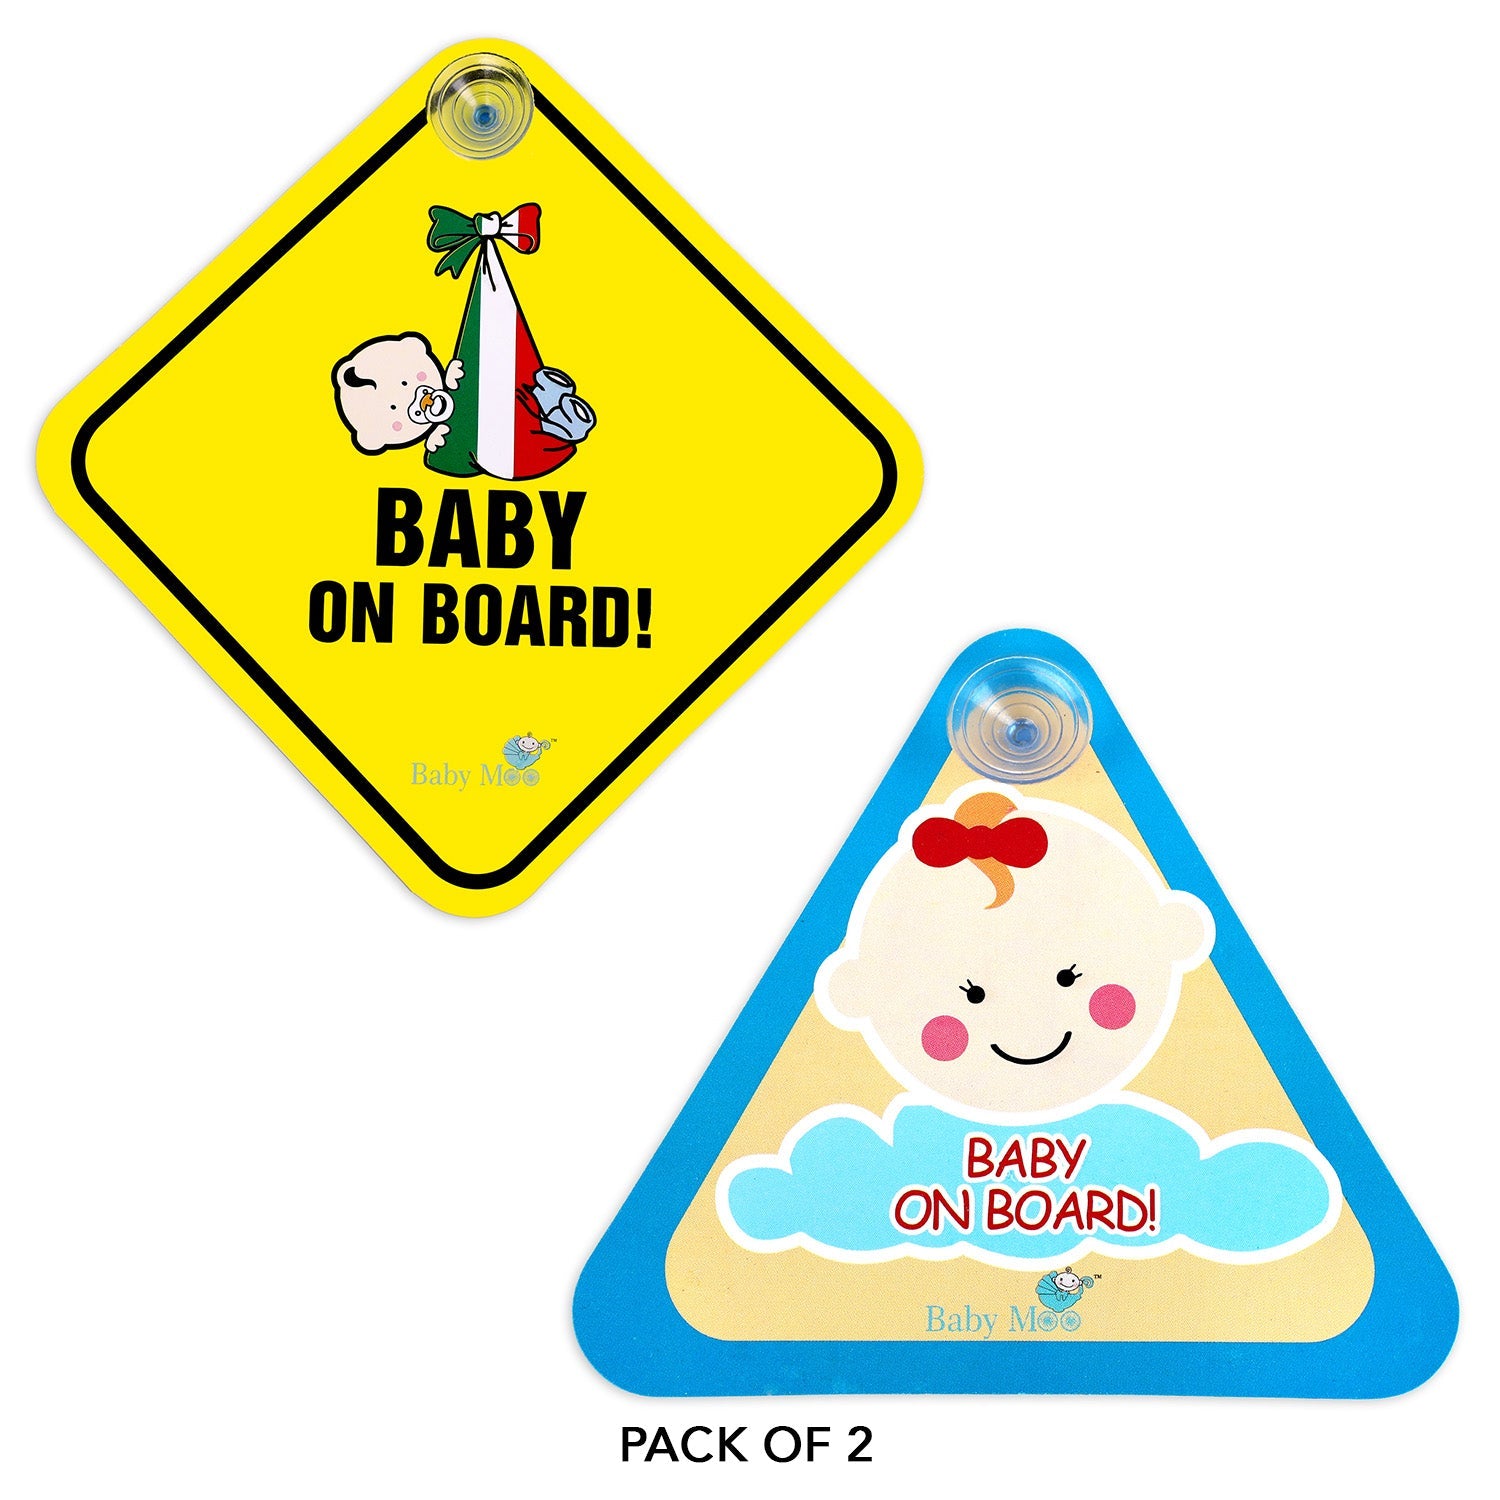 Baby Moo Car Safety Sign Sleeping Baby On Board With Suction Cup Clip 2 Pack - Yellow, Blue